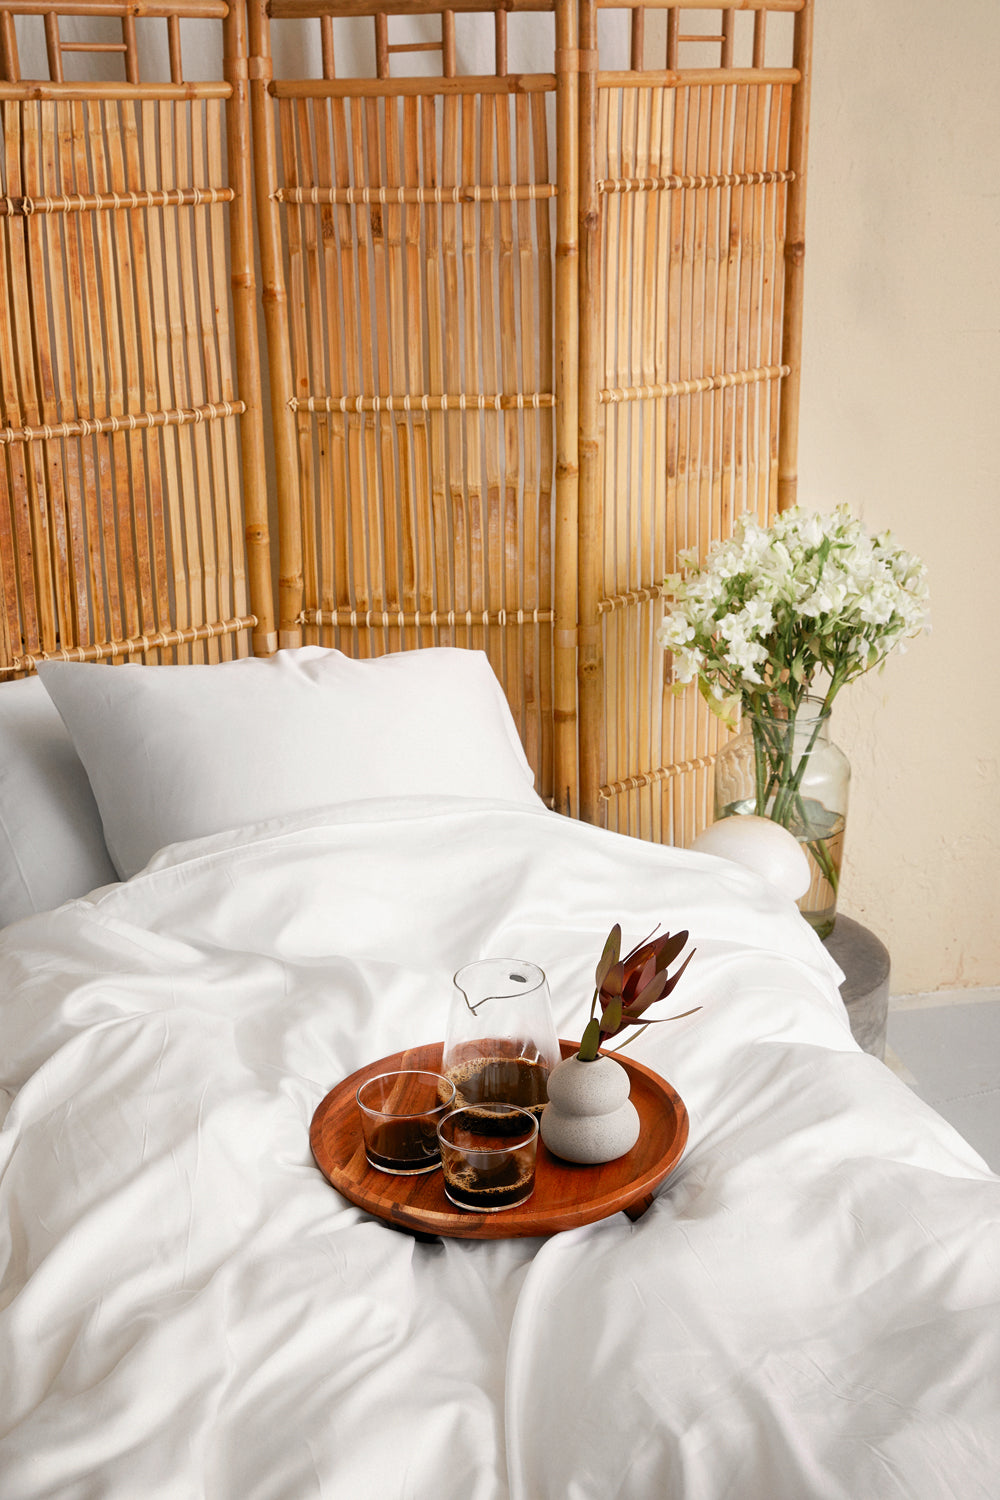 MOVESGOOD - Bamboo Bed Set 150 X 210 cm